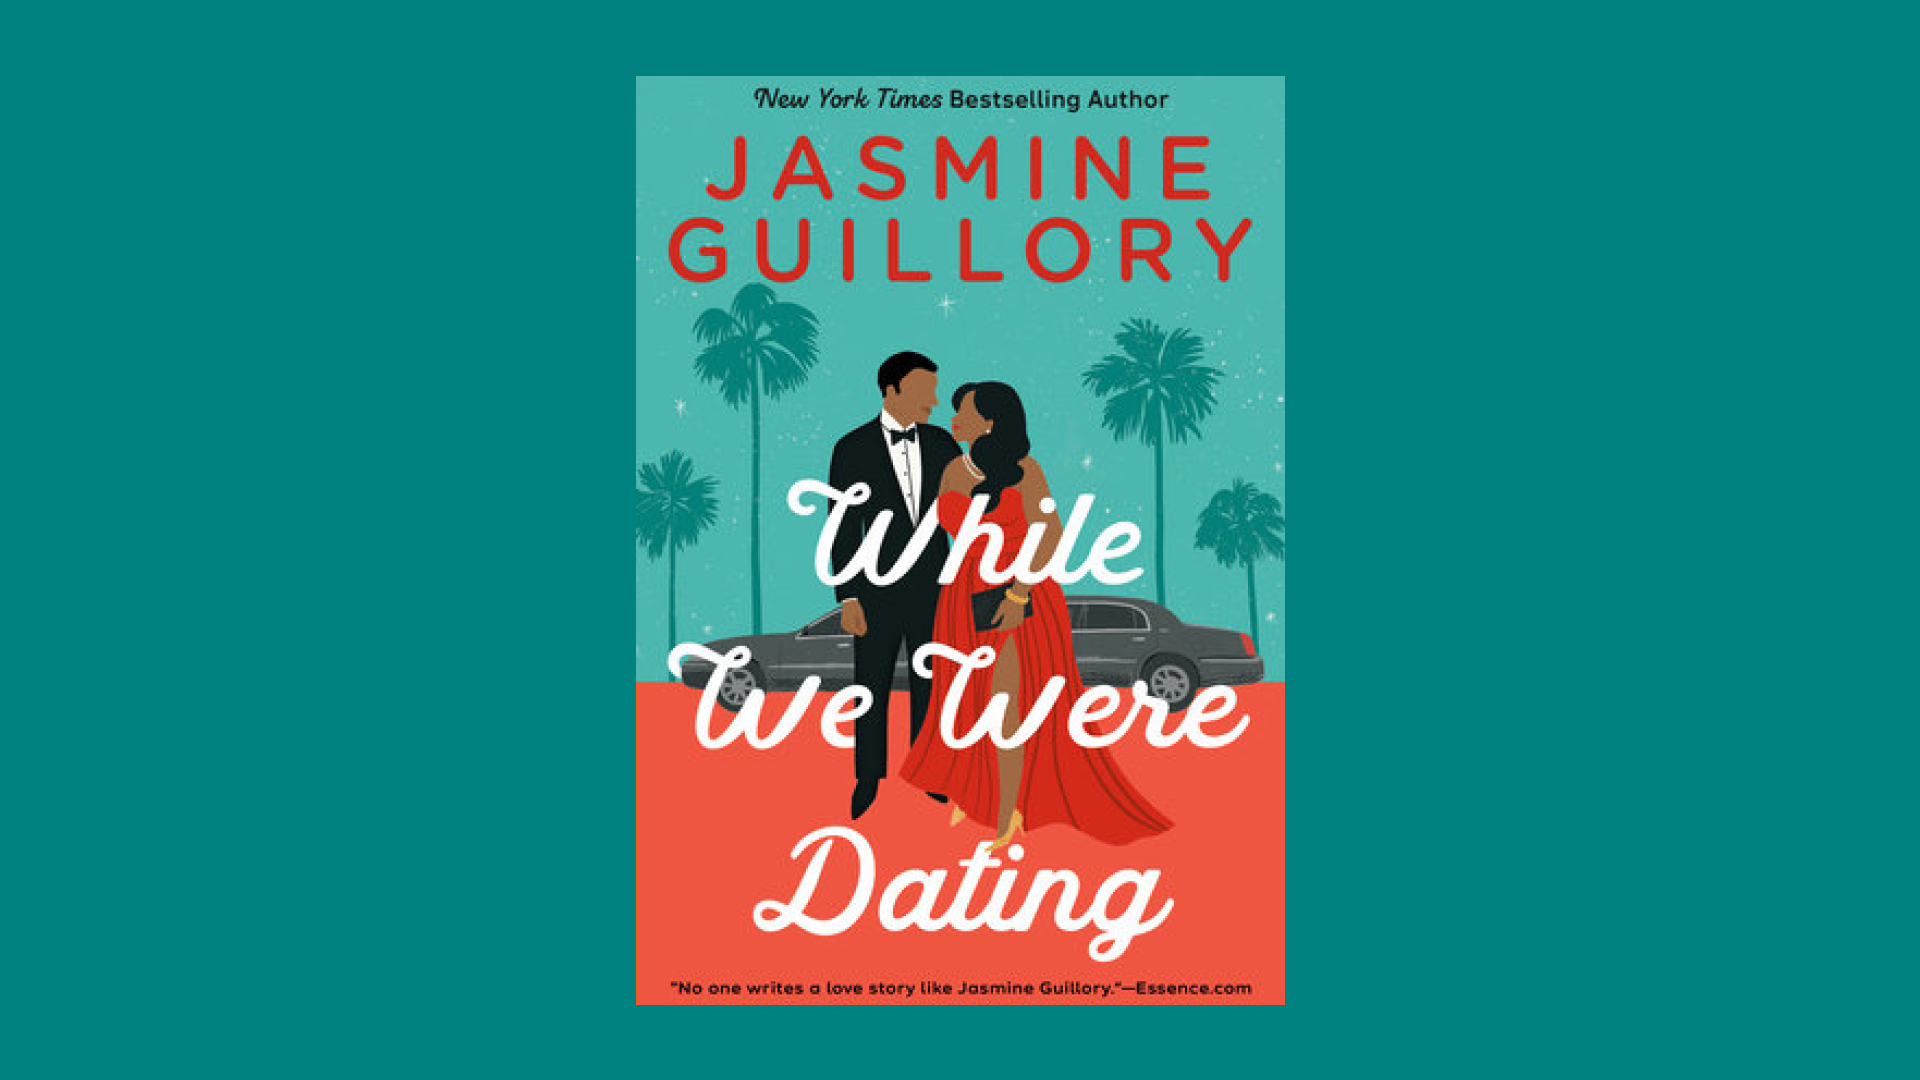 “While We Were Dating” by Jasmine Guillory